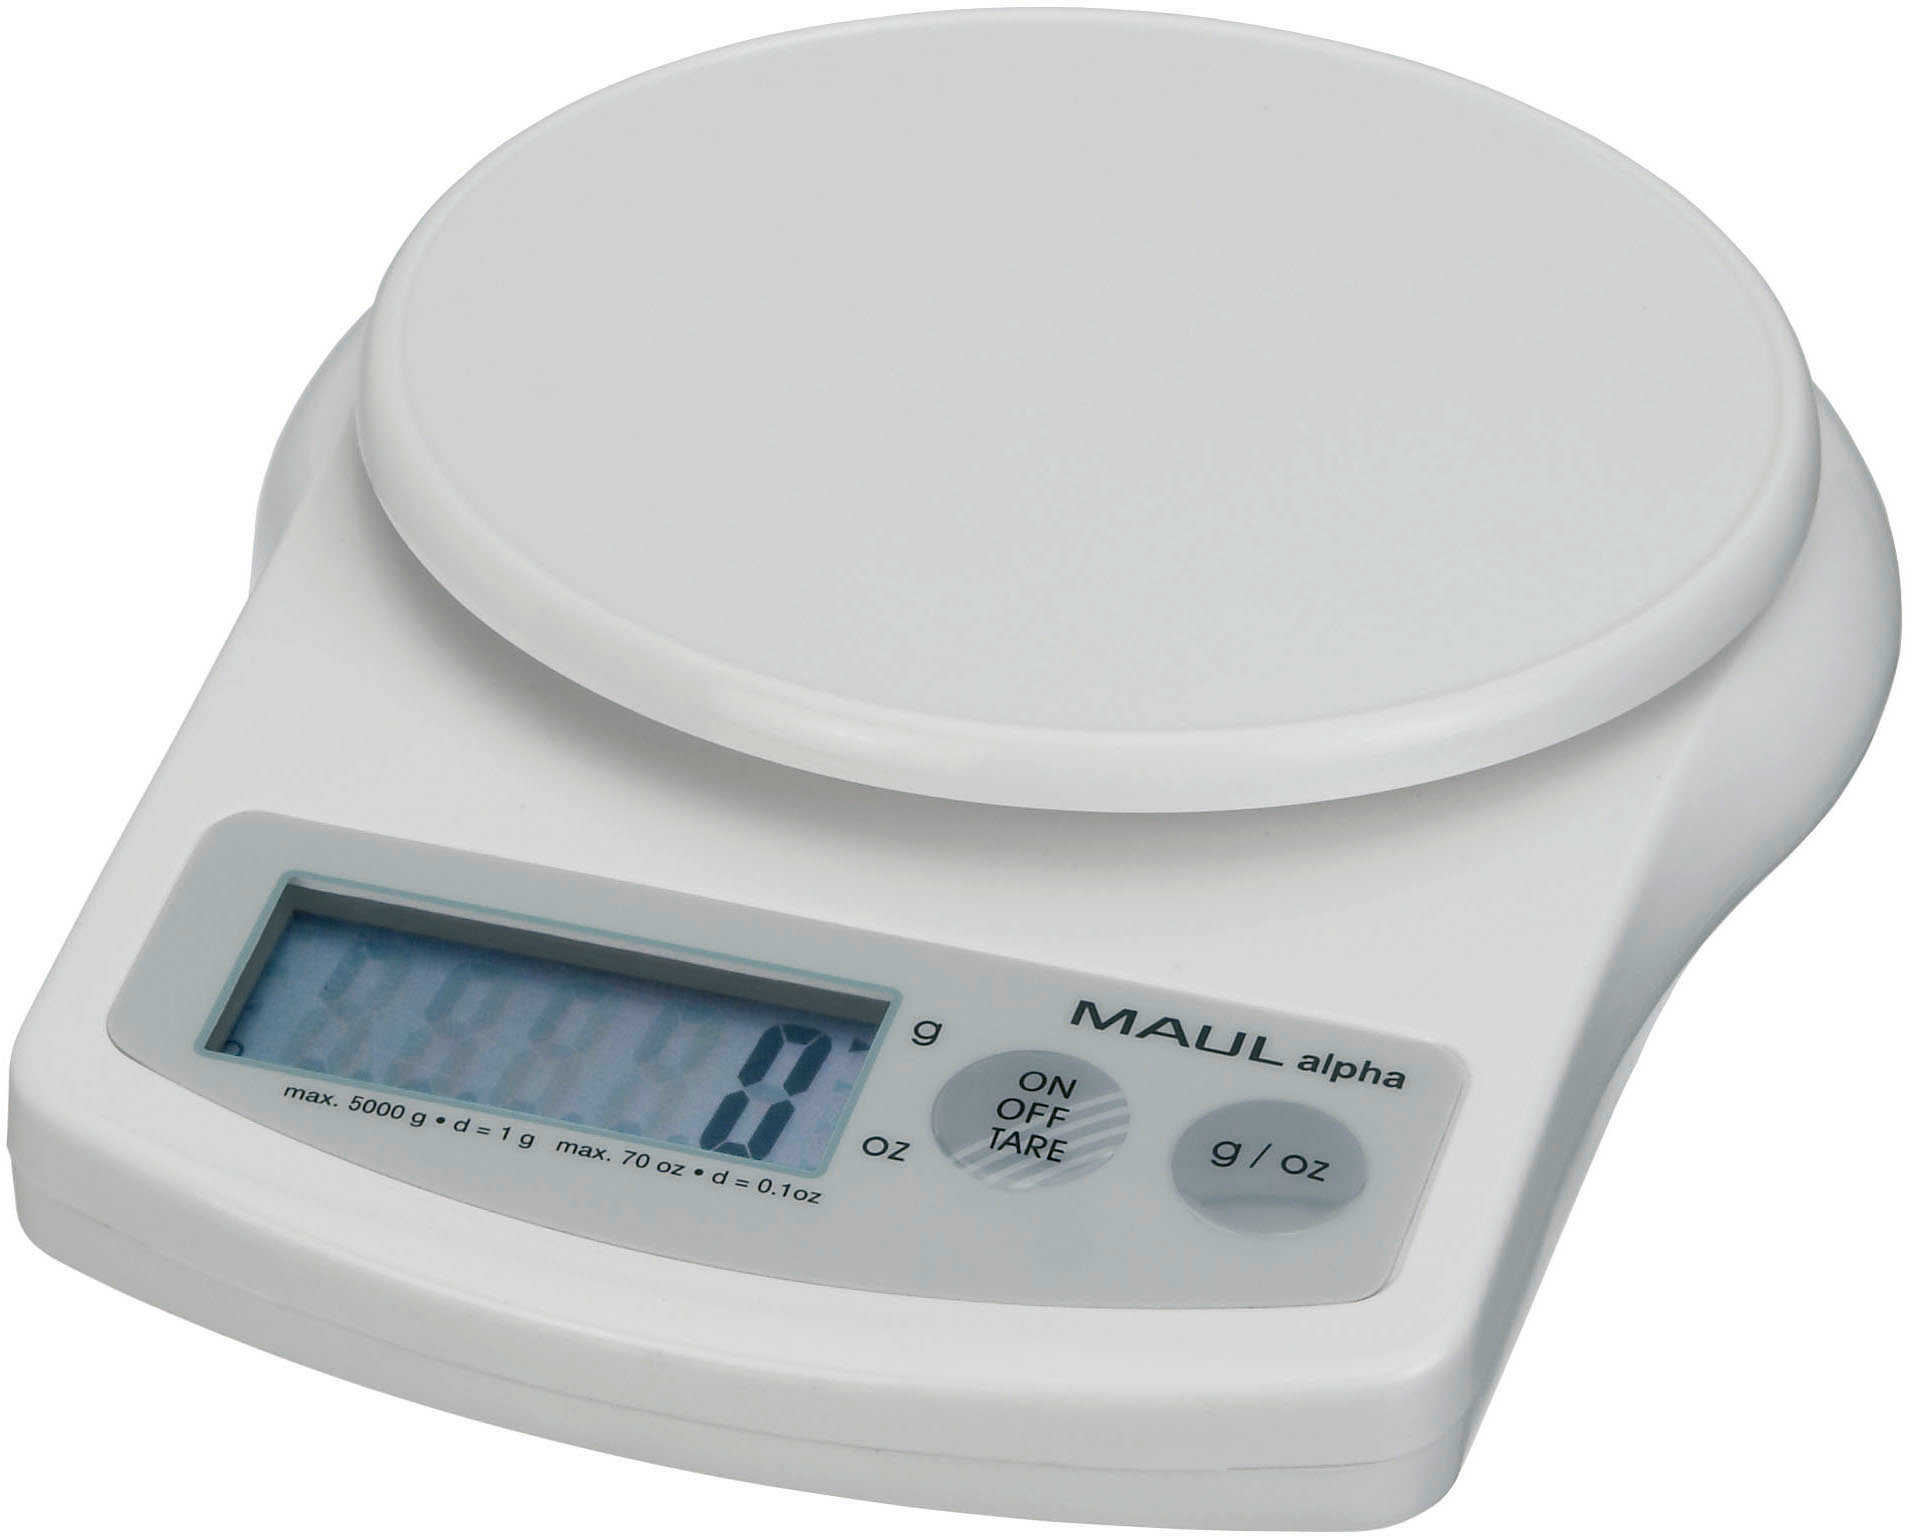 MAUL Briefwaage MAULalpha 5000g 1645002 mit Batterie